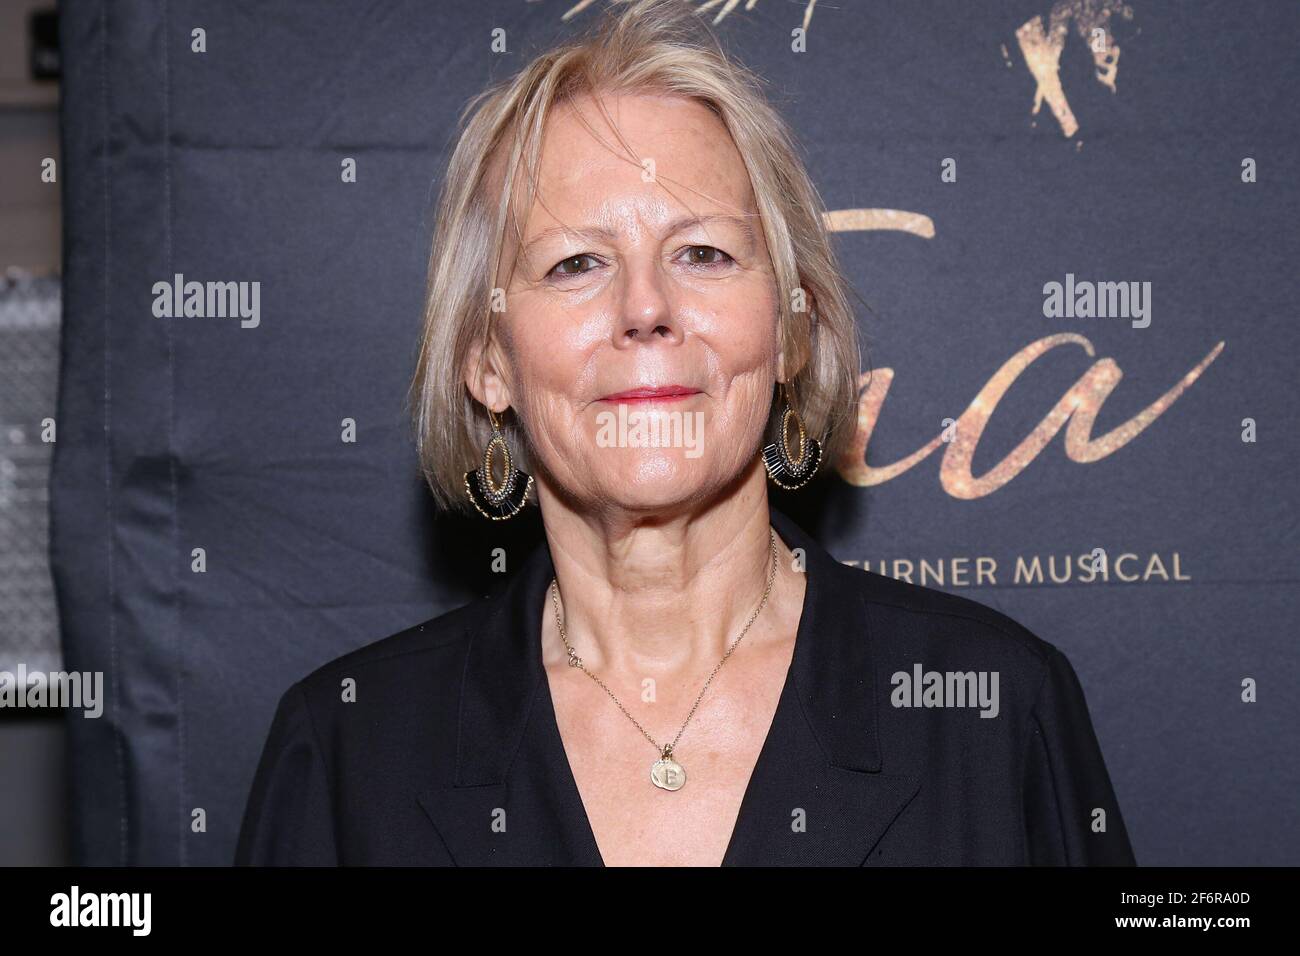 NEW YORK, NY – NOVEMBER 7: Phyllida Lloyd arrives for the opening night of Tina - The Tina Turner Musical, held at the Lunt-Fontanne Theatre, on November 7, 2019, in New York City. Credit: Joseph Marzullo/MediaPunch Stock Photo